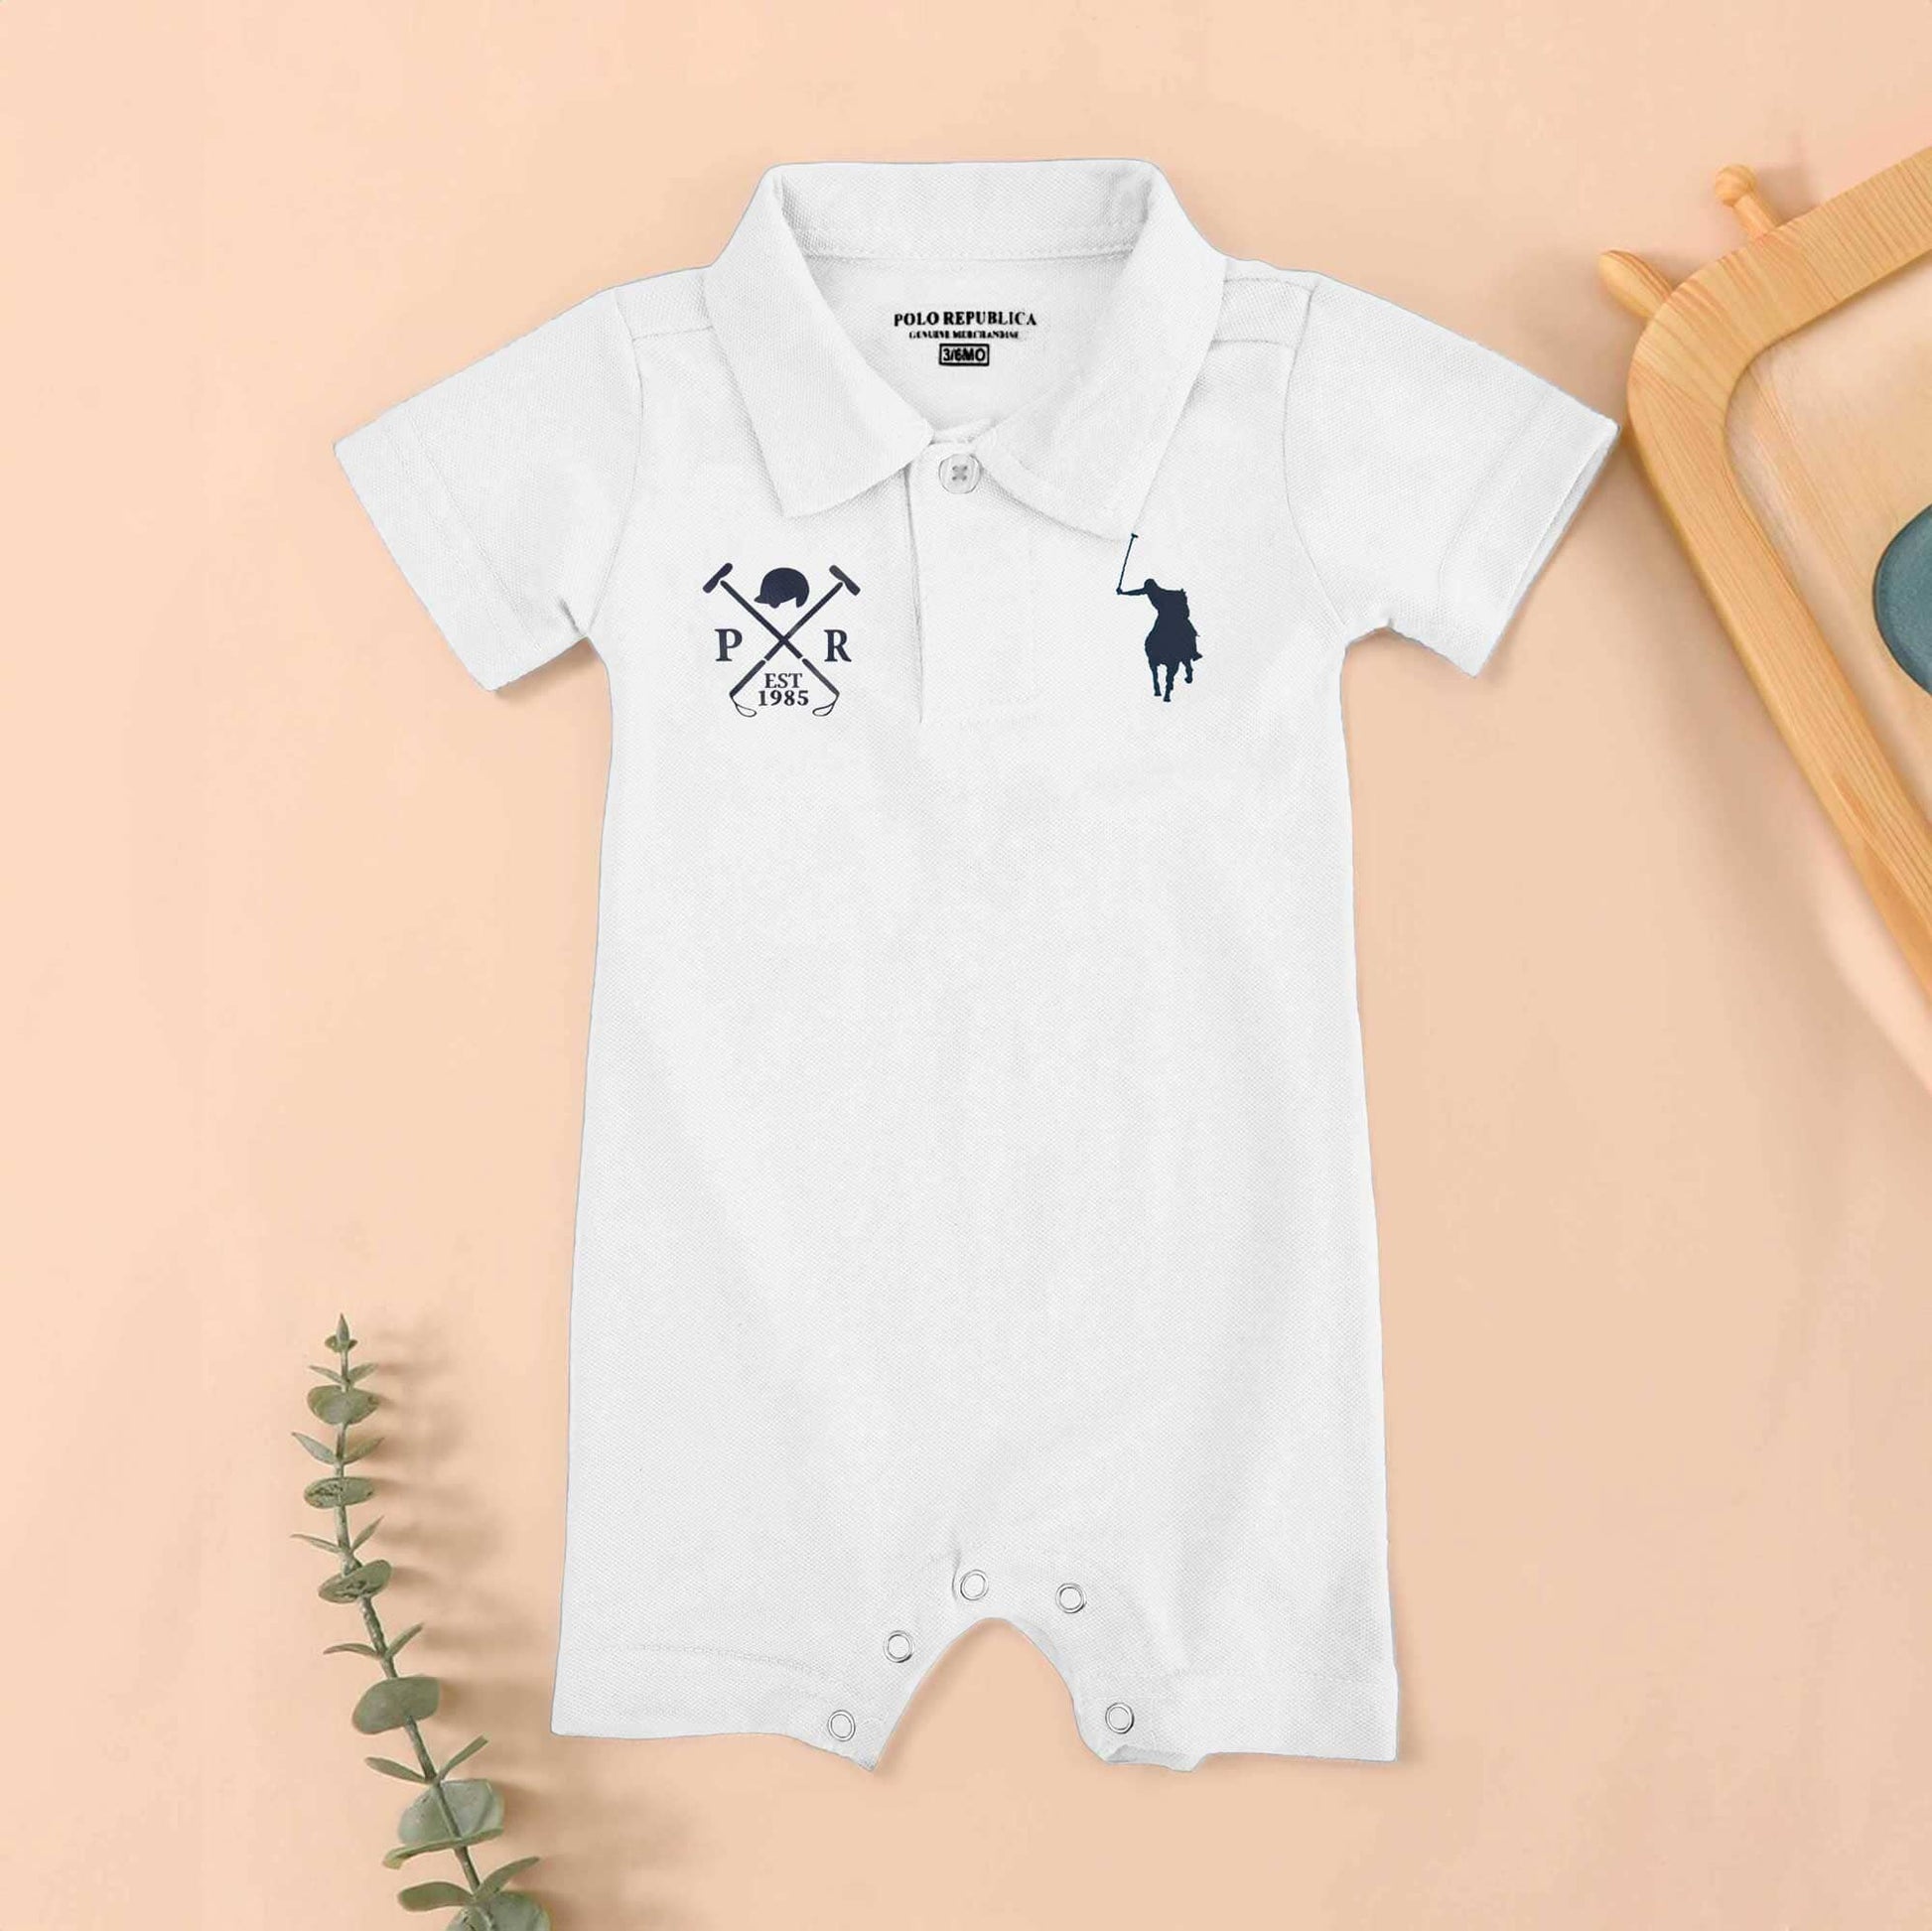 Polo Republica Signature Pony PR Mallets Printed Short Sleeve Baby Romper Romper Polo Republica White & Navy 0-3 Months 